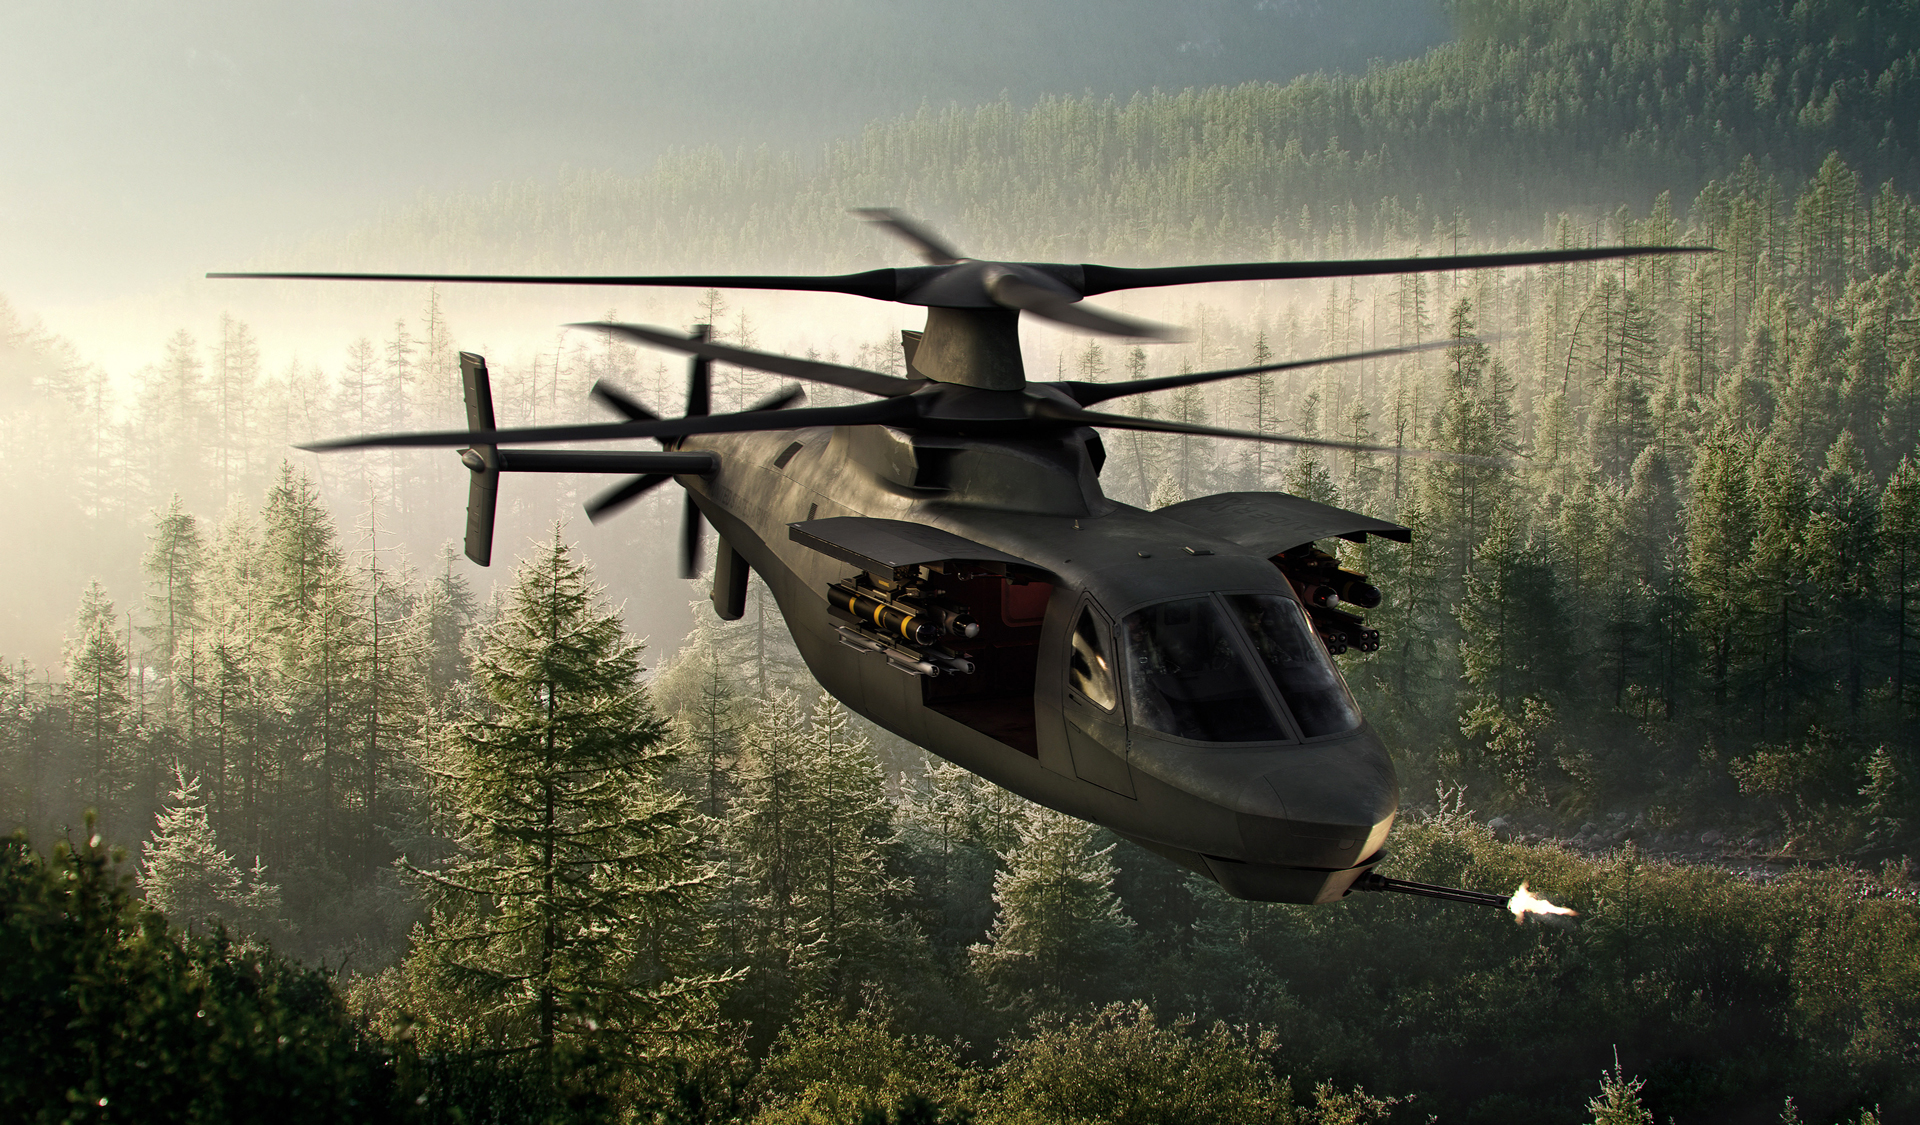 RAIDER X Could Be the Fastest Helicopter Ever | The National Interest